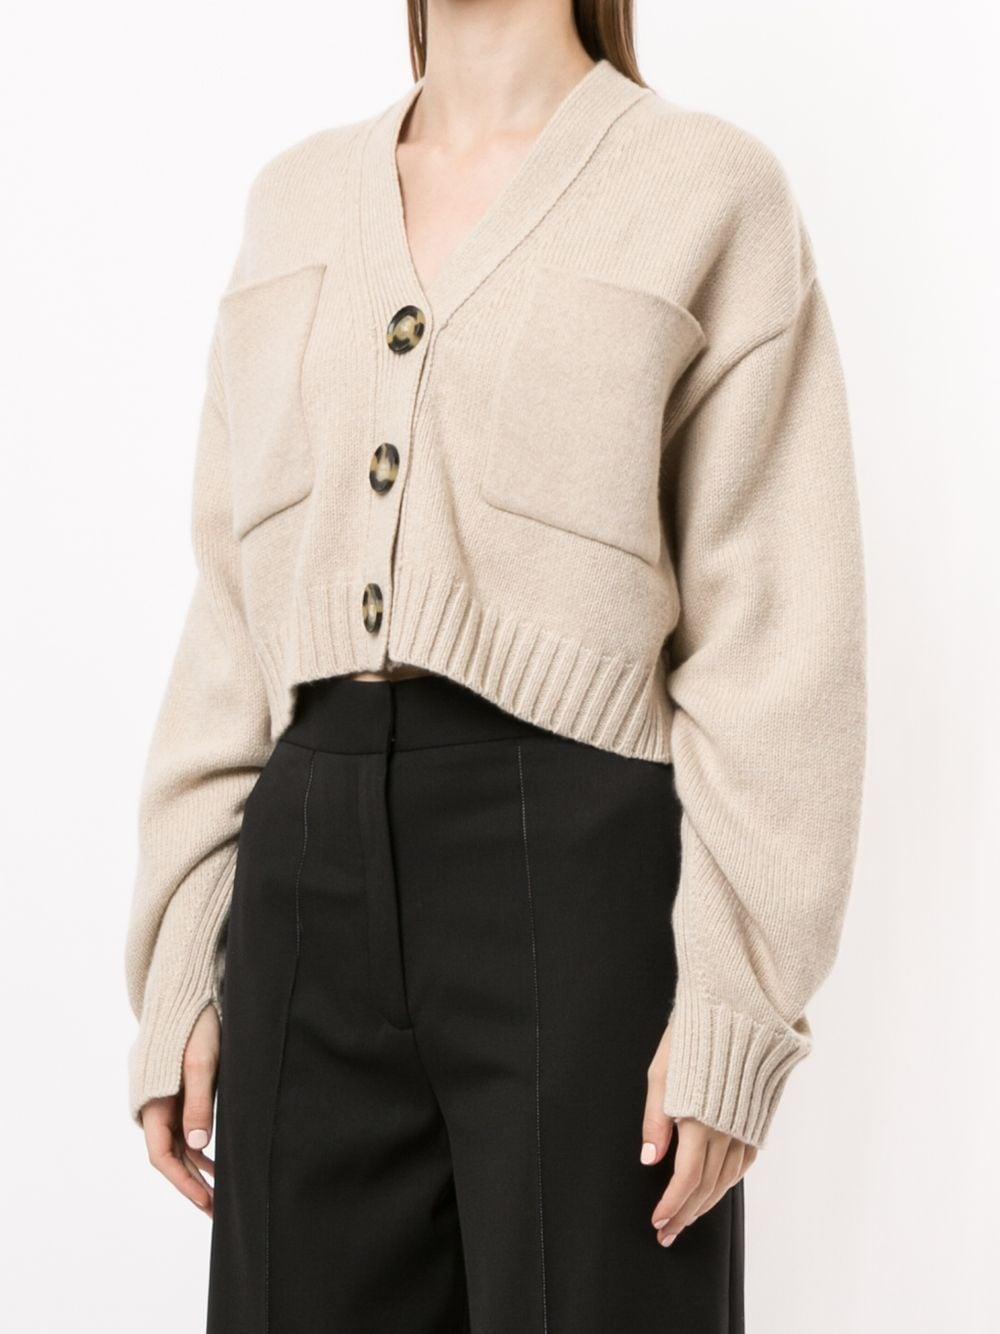 Proenza Schouler Cashmere Cropped V-neck Cardigan in Brown - Lyst